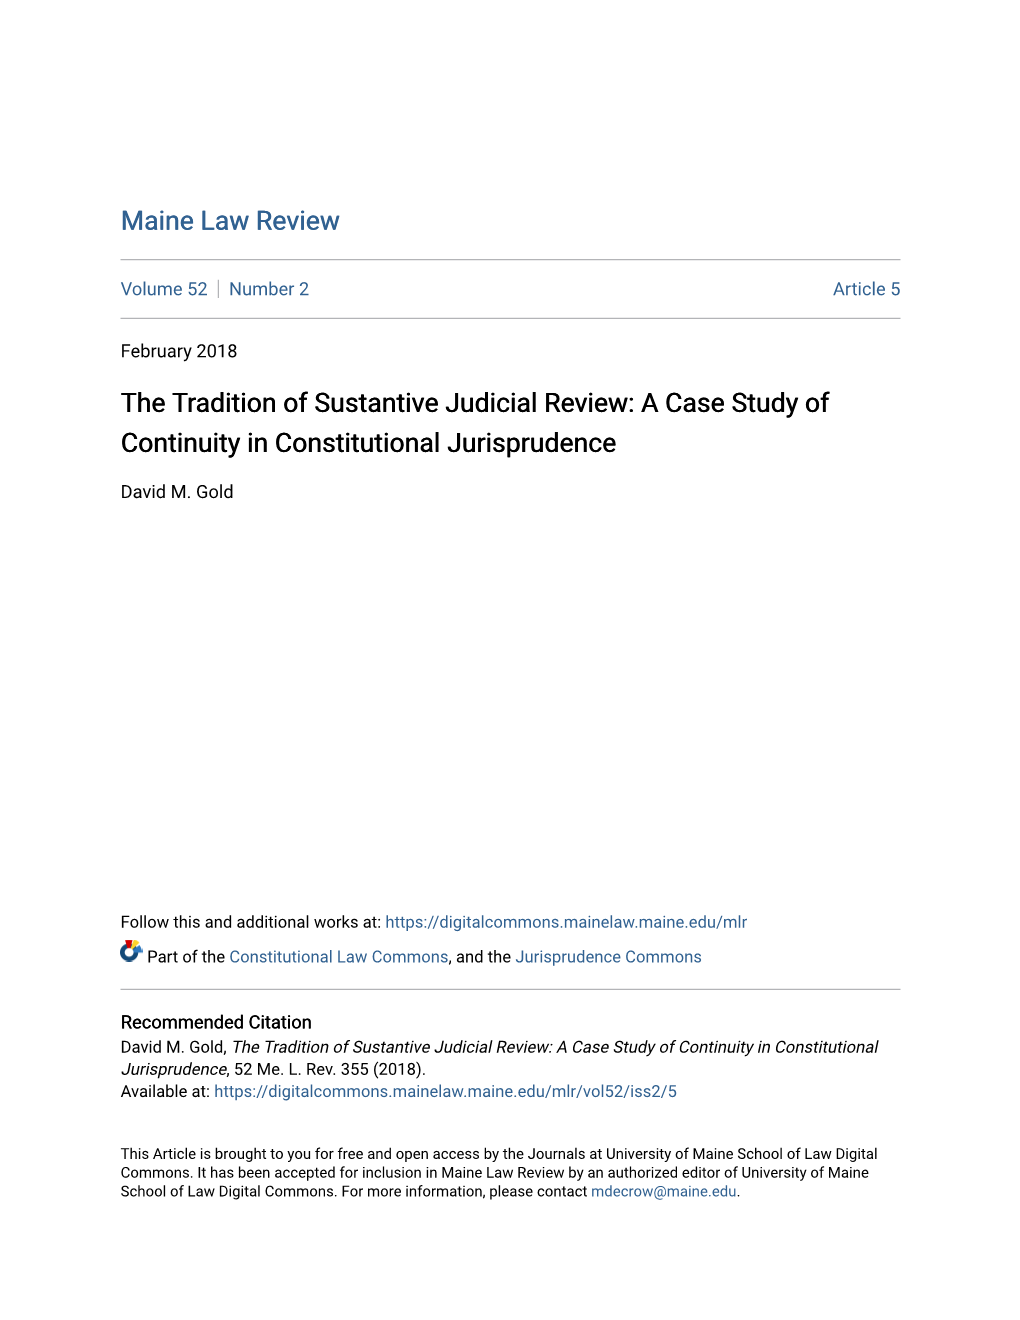 The Tradition of Sustantive Judicial Review: a Case Study of Continuity in Constitutional Jurisprudence